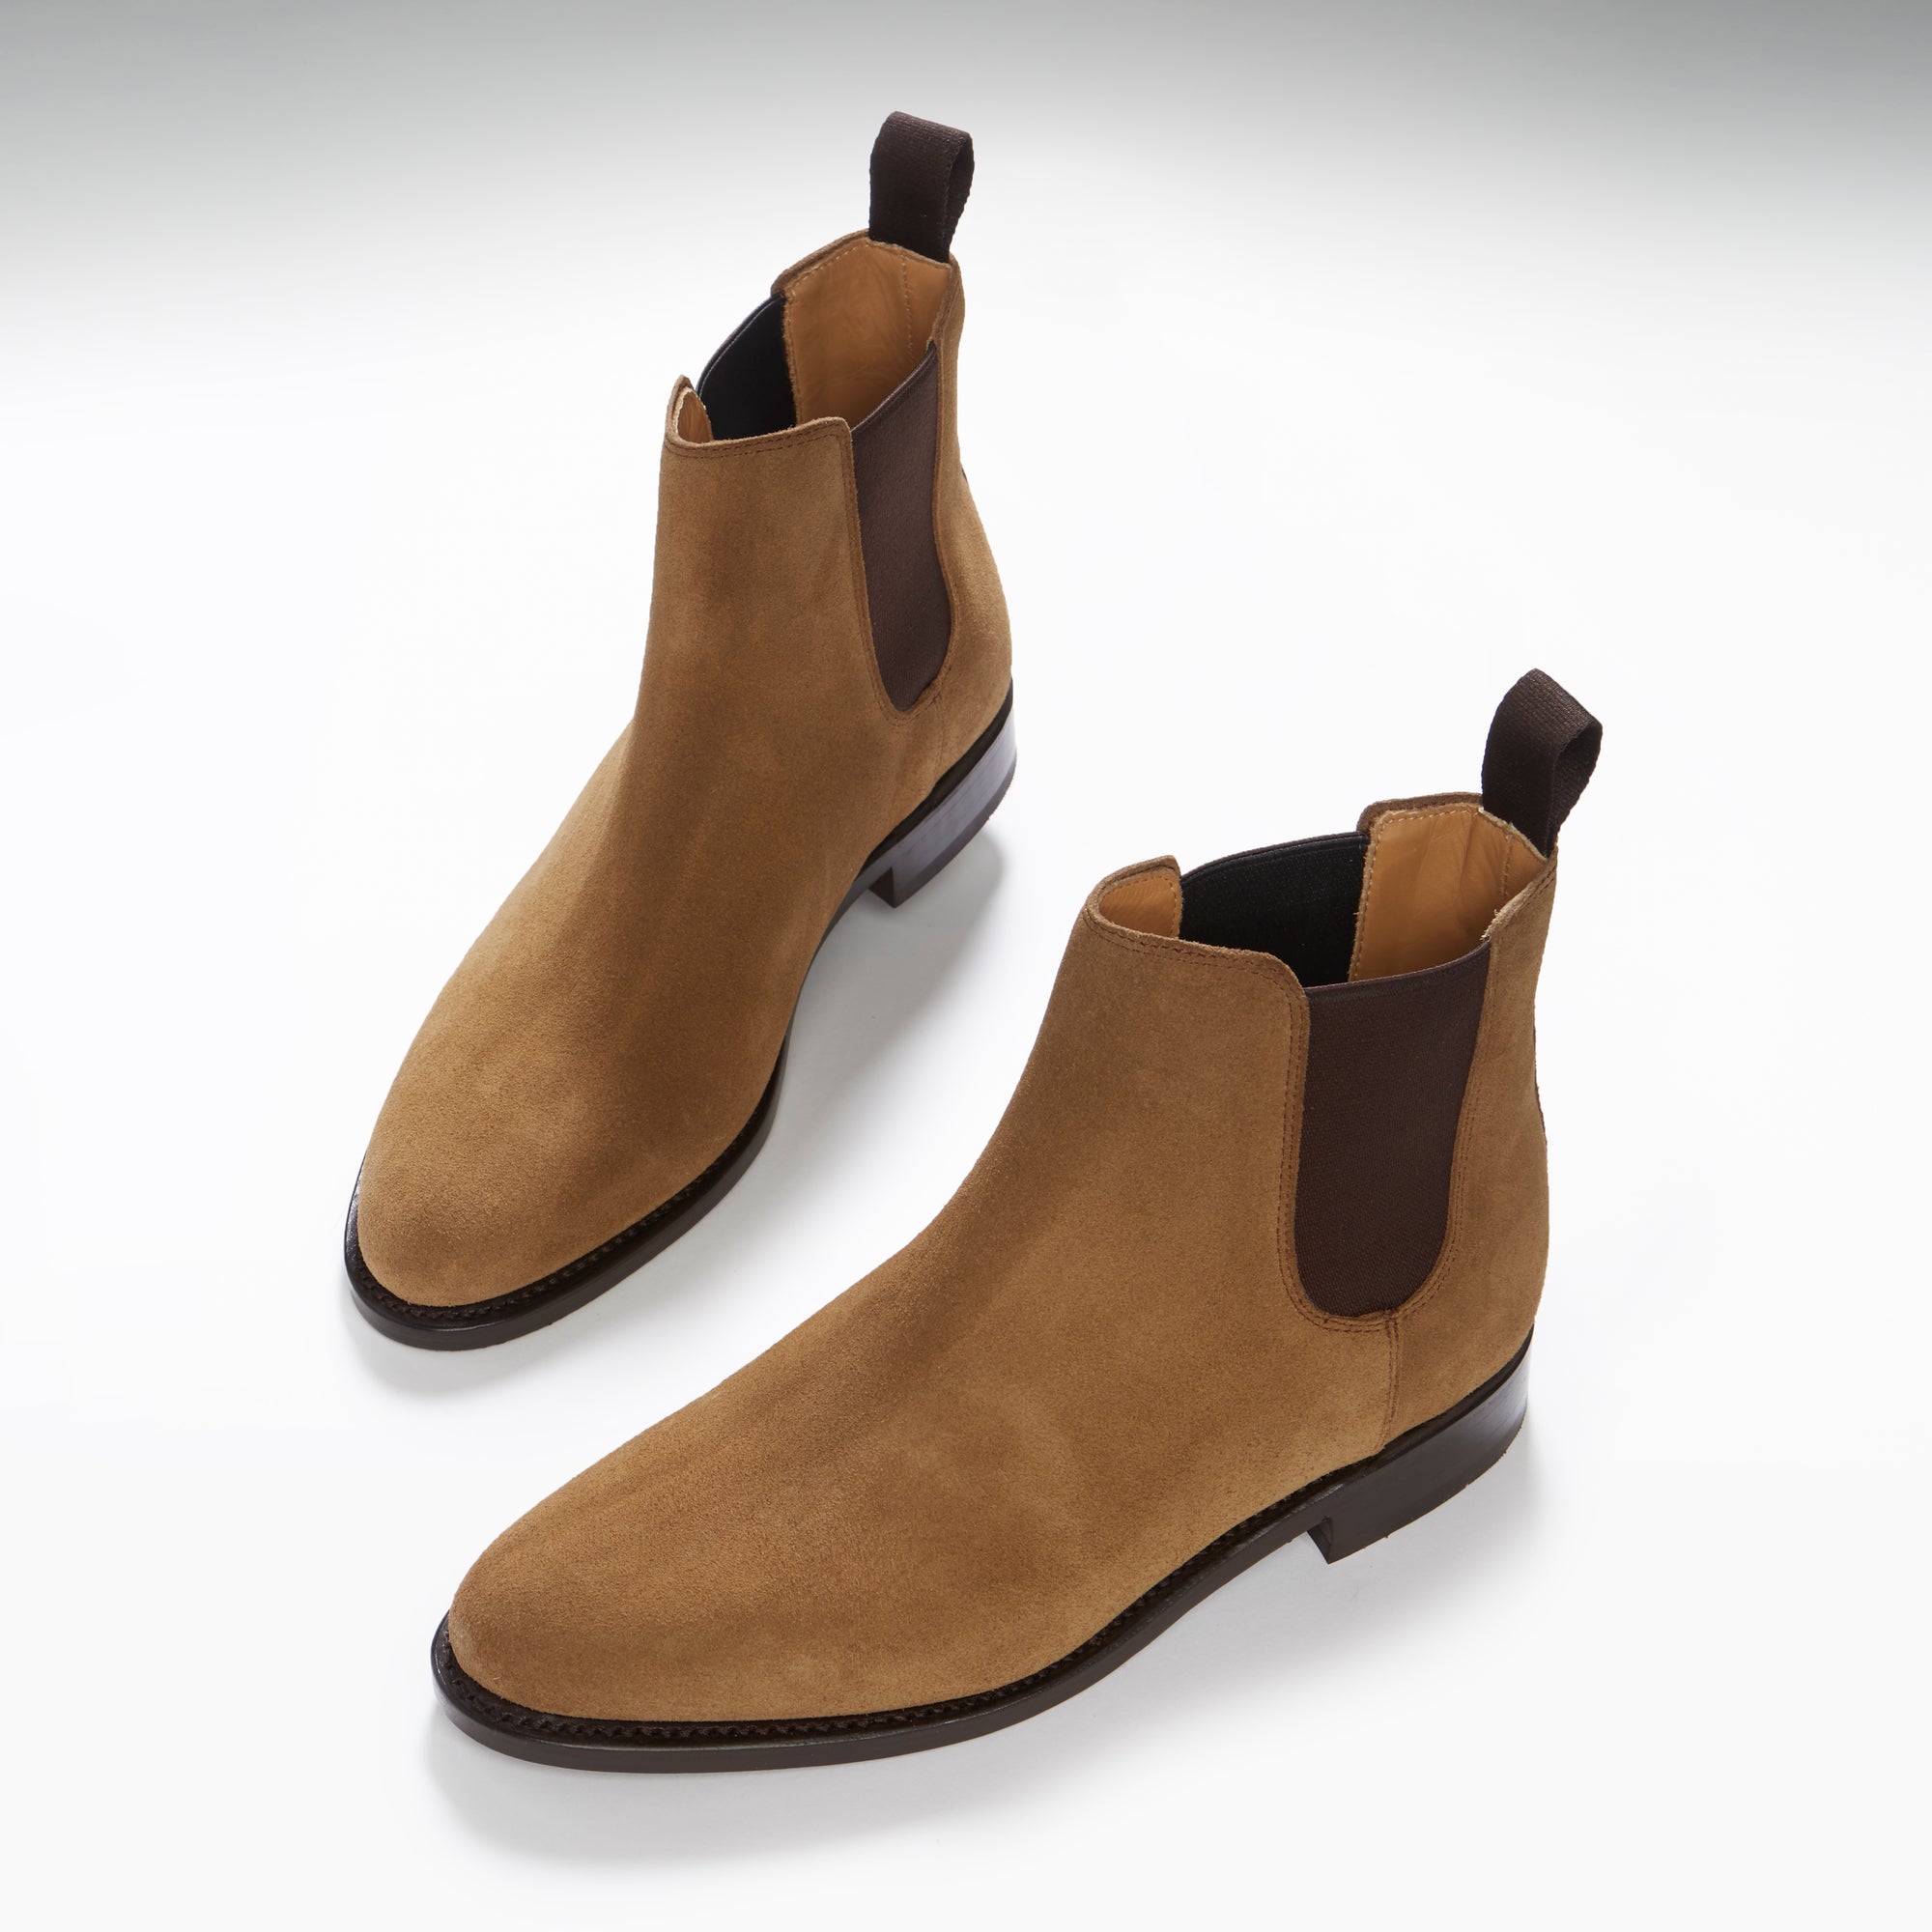 Women's Tobacco Suede Chelsea Boots, Welted Leather Sole